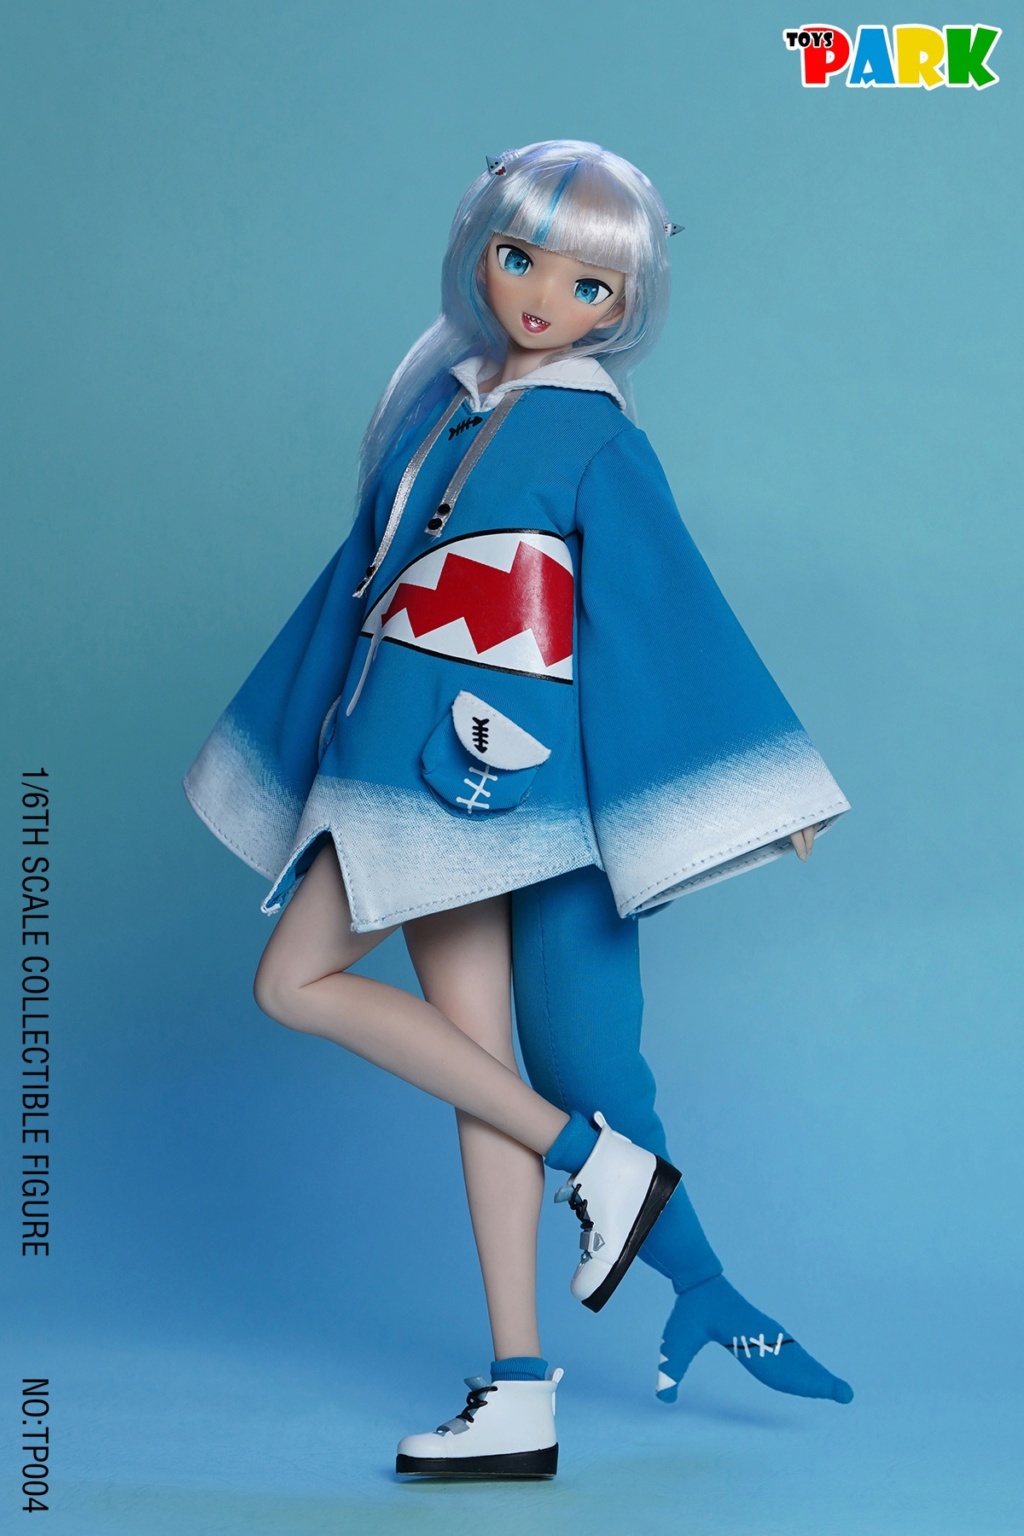 stylized - NEW PRODUCT: TOYS PARK: 1/6 Shark Girl Accessories Set #TP004 7e1a9510